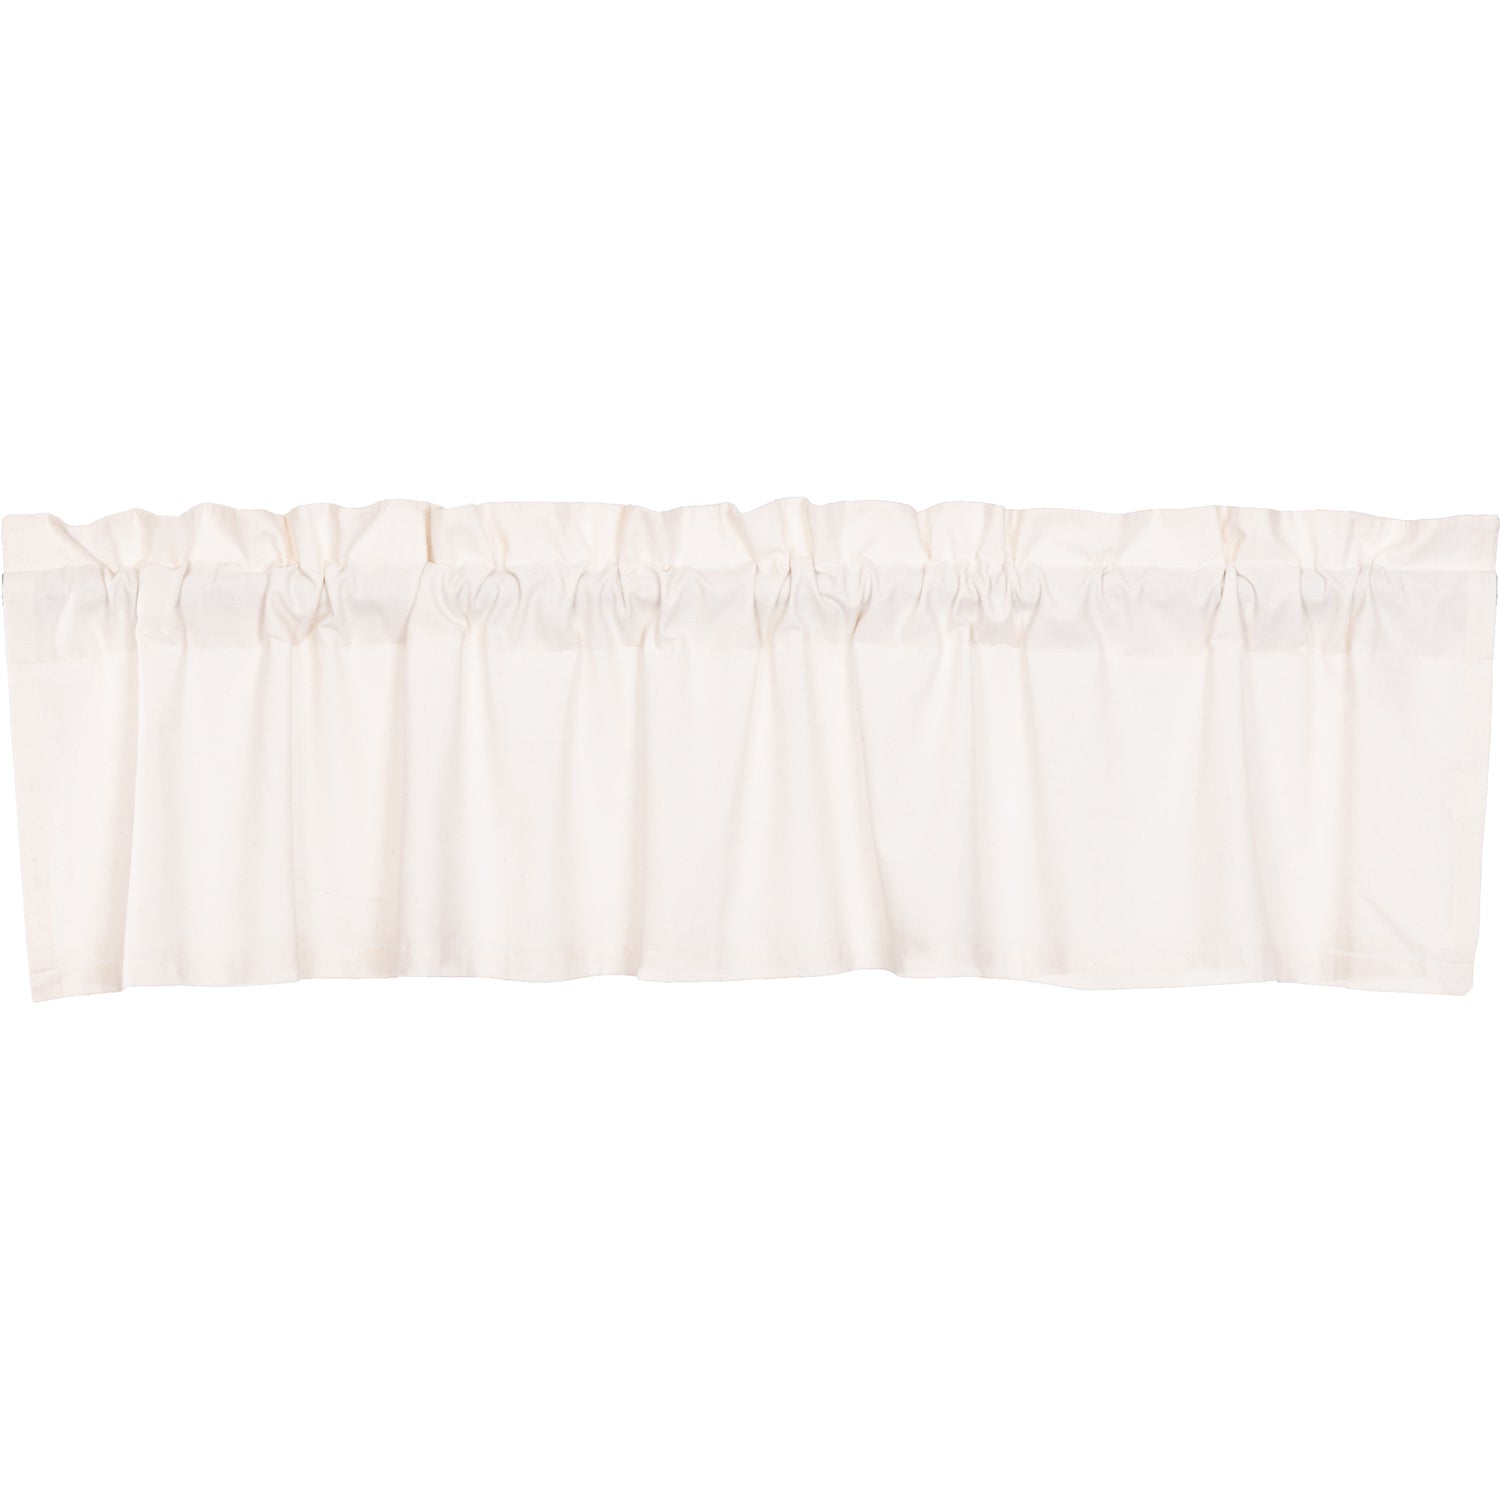 April & Olive Simple Life Flax Antique White Valance 16x72 By VHC Brands